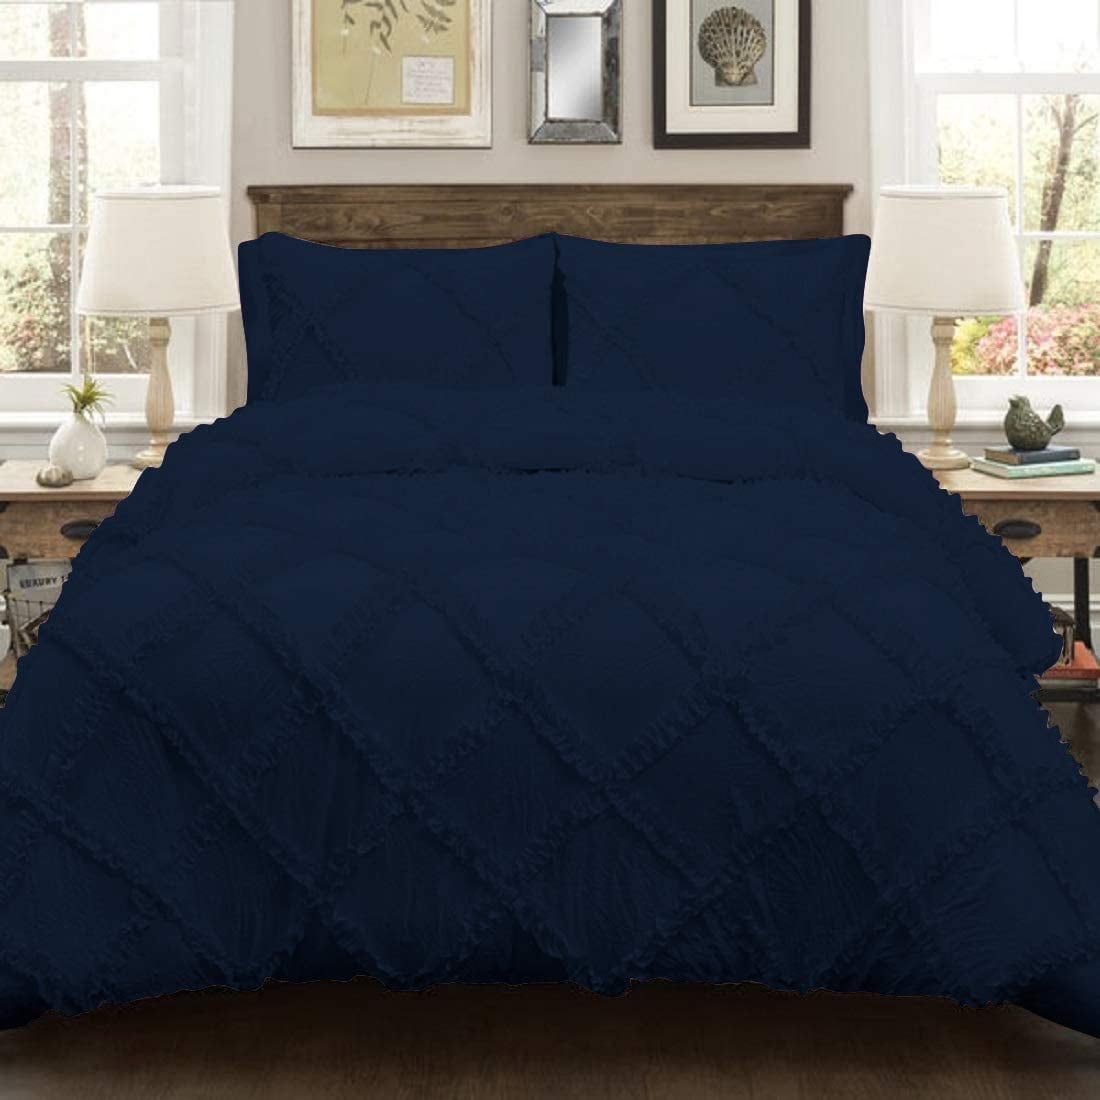 Duvet Cover Navy Blue Solid 100% Egyptian Cotton 800 TC Luxury 3